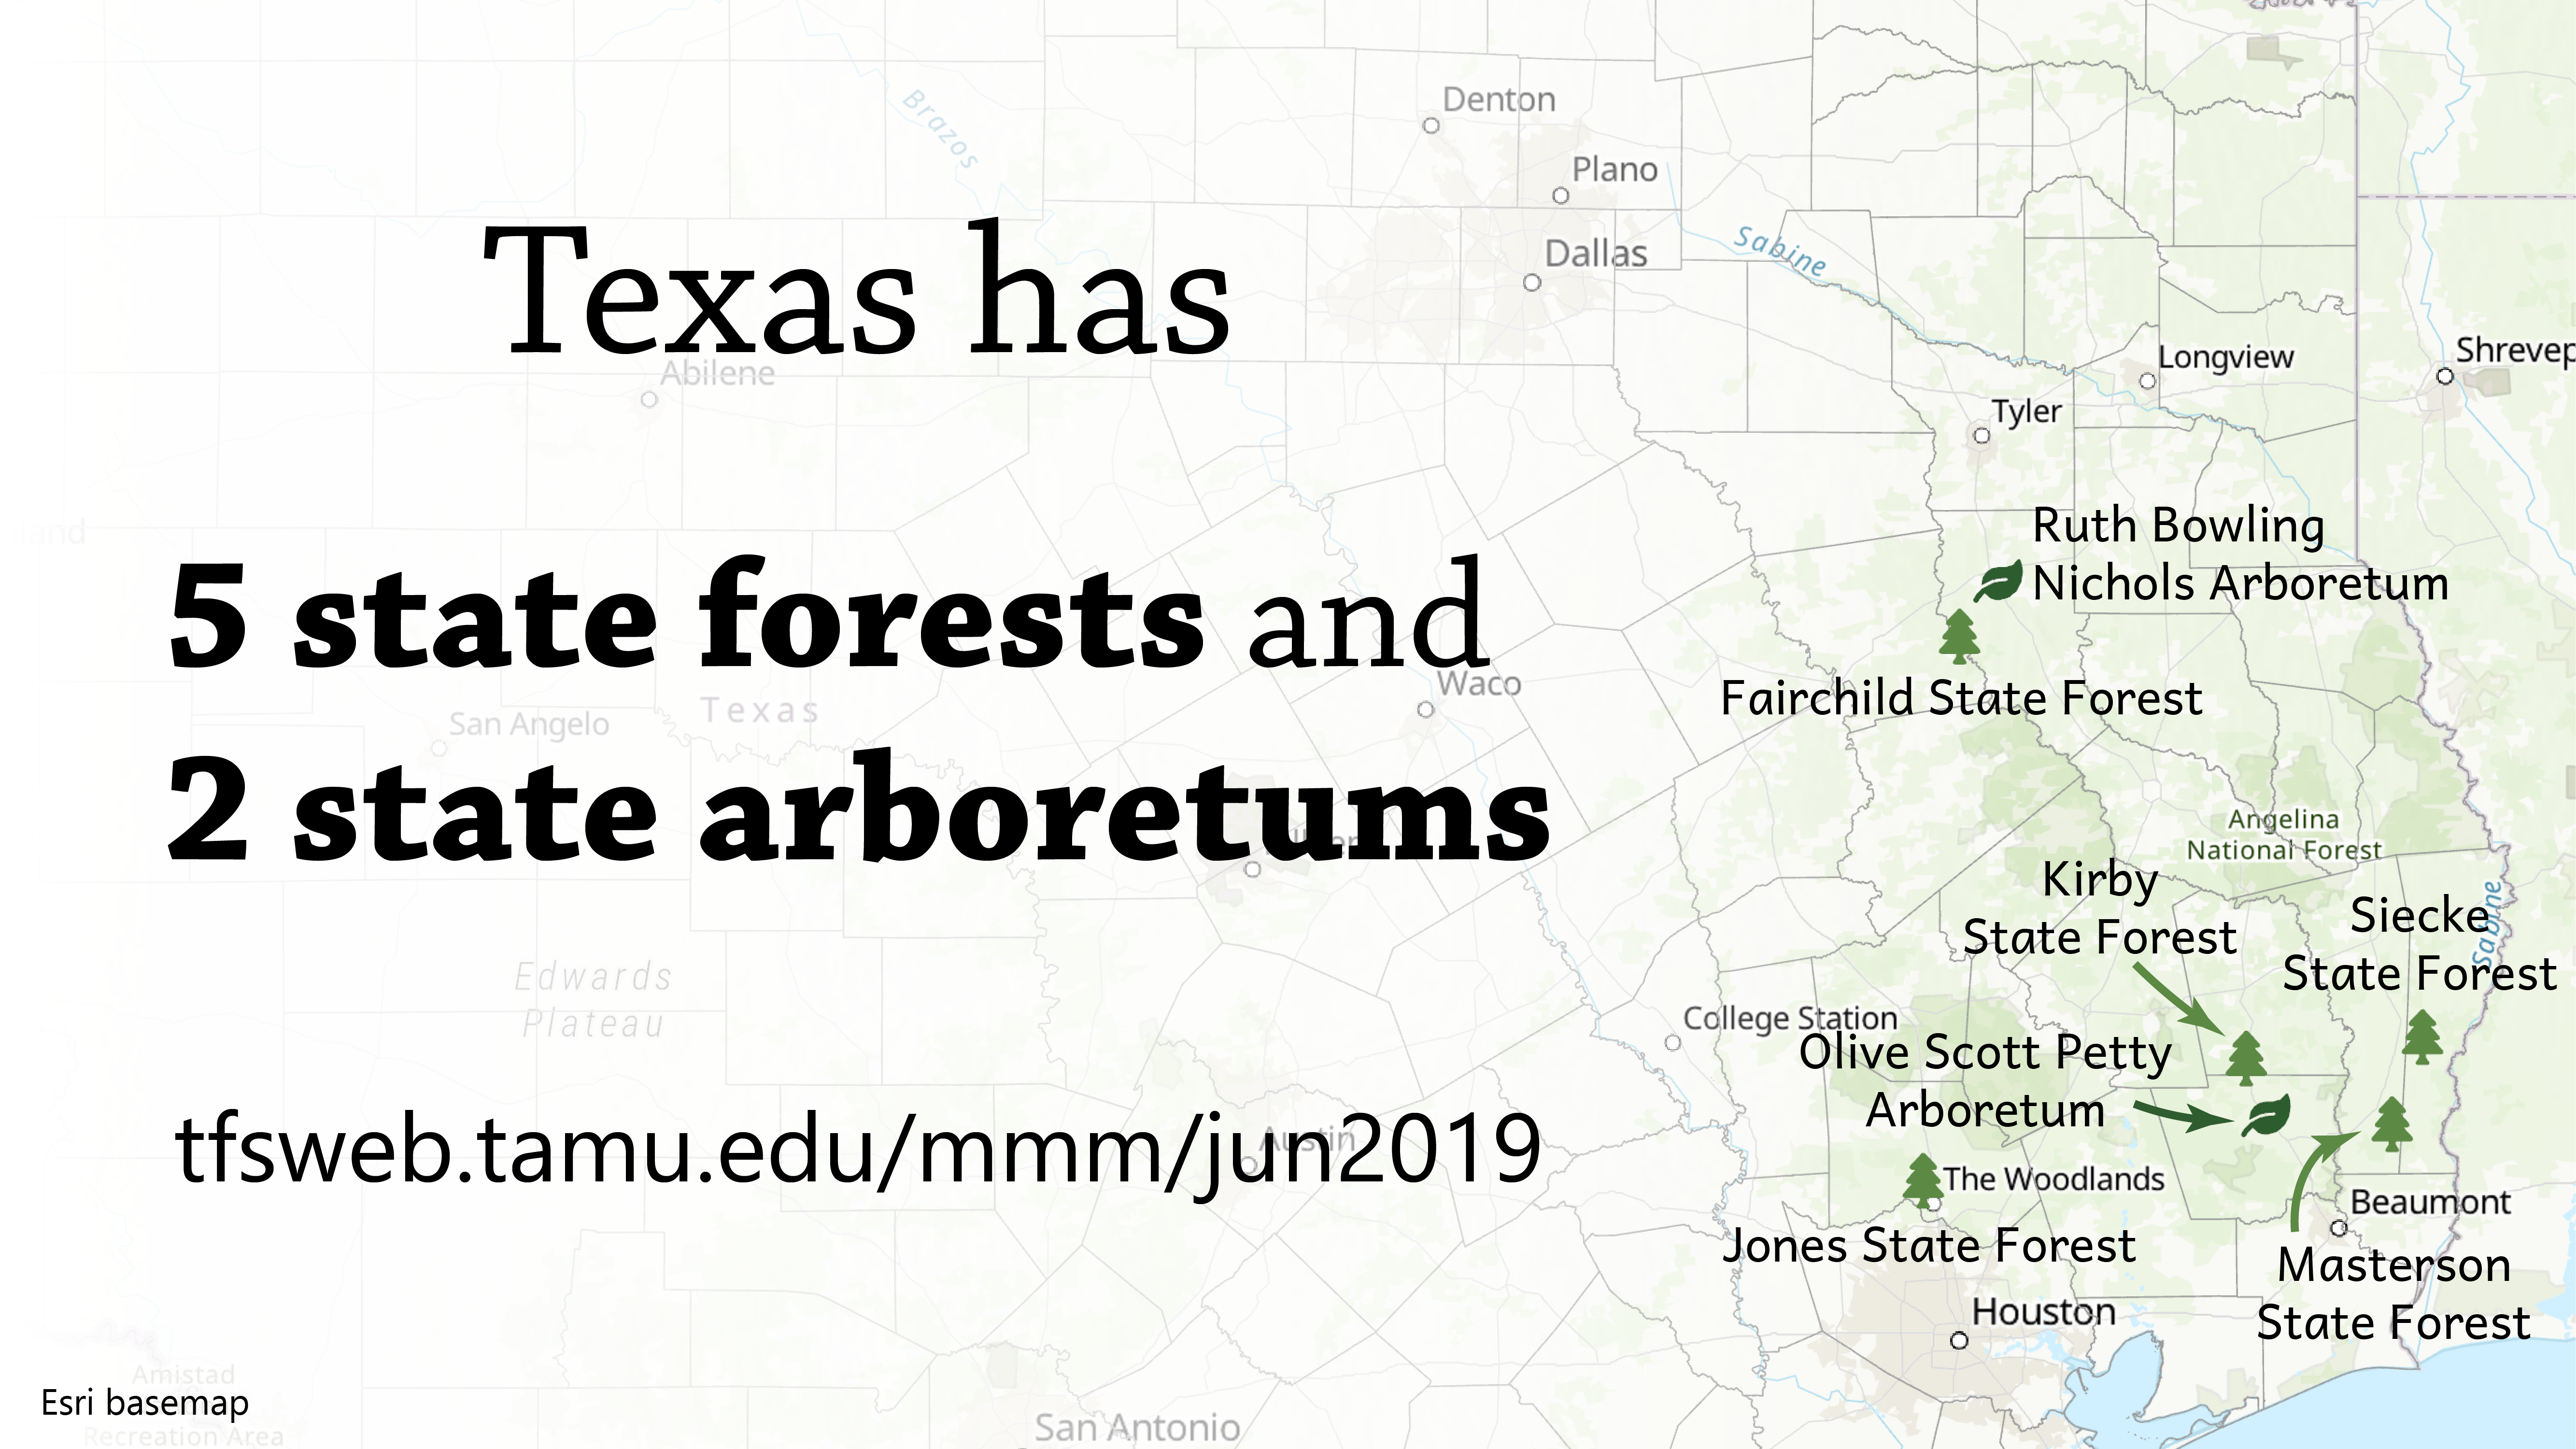 Texas State Forests and Arboretums